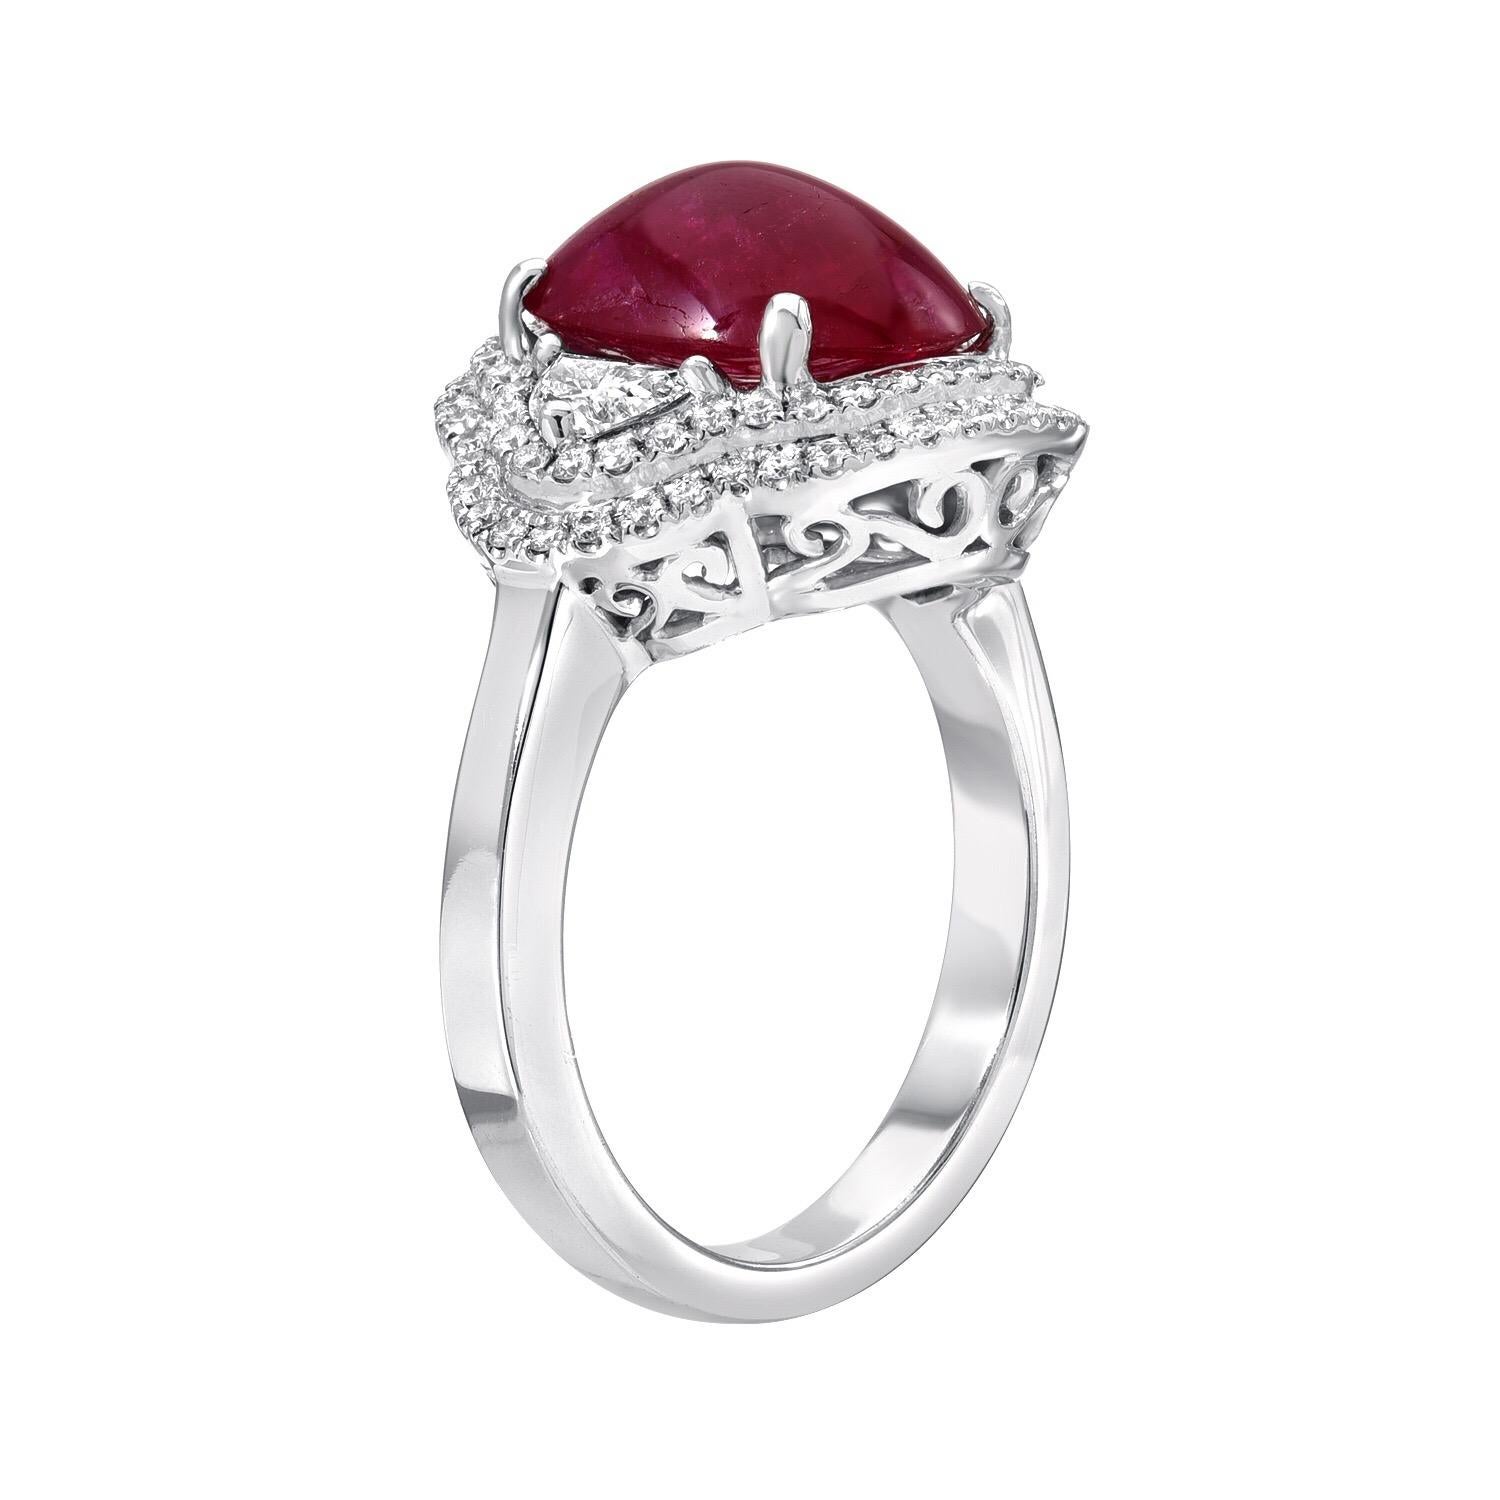 Natural Ruby ring featuring an unheated 5.00 carat cabochon, adorned by a total of 1.20 carat diamonds, creating this impressive 18K white gold cocktail ring. 
Size 6. Resizing is complementary upon request.
The GIA certificate is attached to the